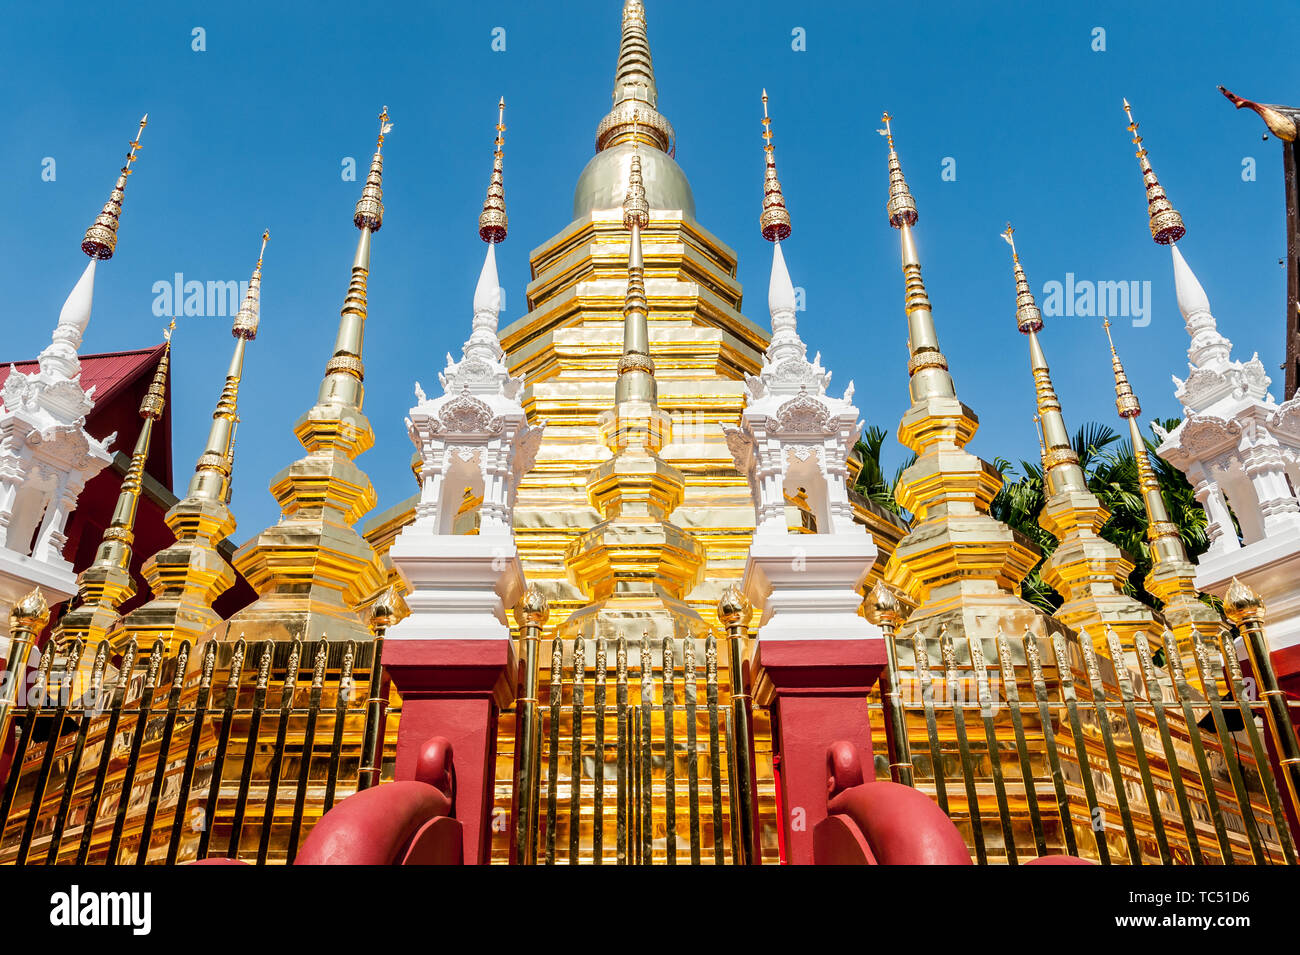 A shot looking across to the detailed ornate gold design of the beautiful Thai Temple Wat Phantao in Chiang Mai Thailand. Stock Photo